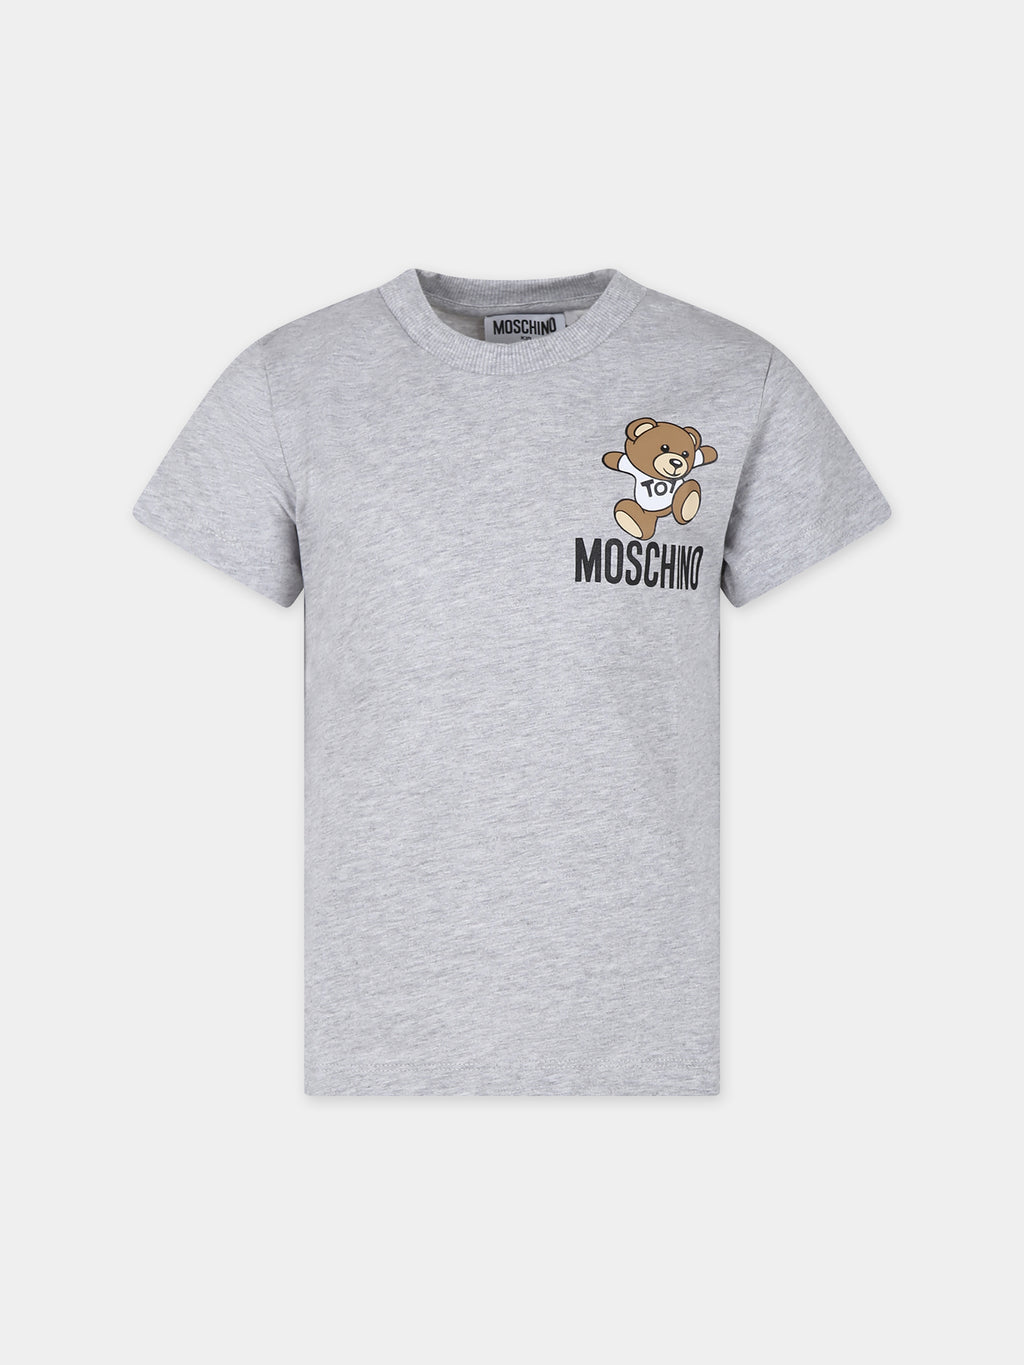 Grey t-shirt for kids with Teddy Bear and logo